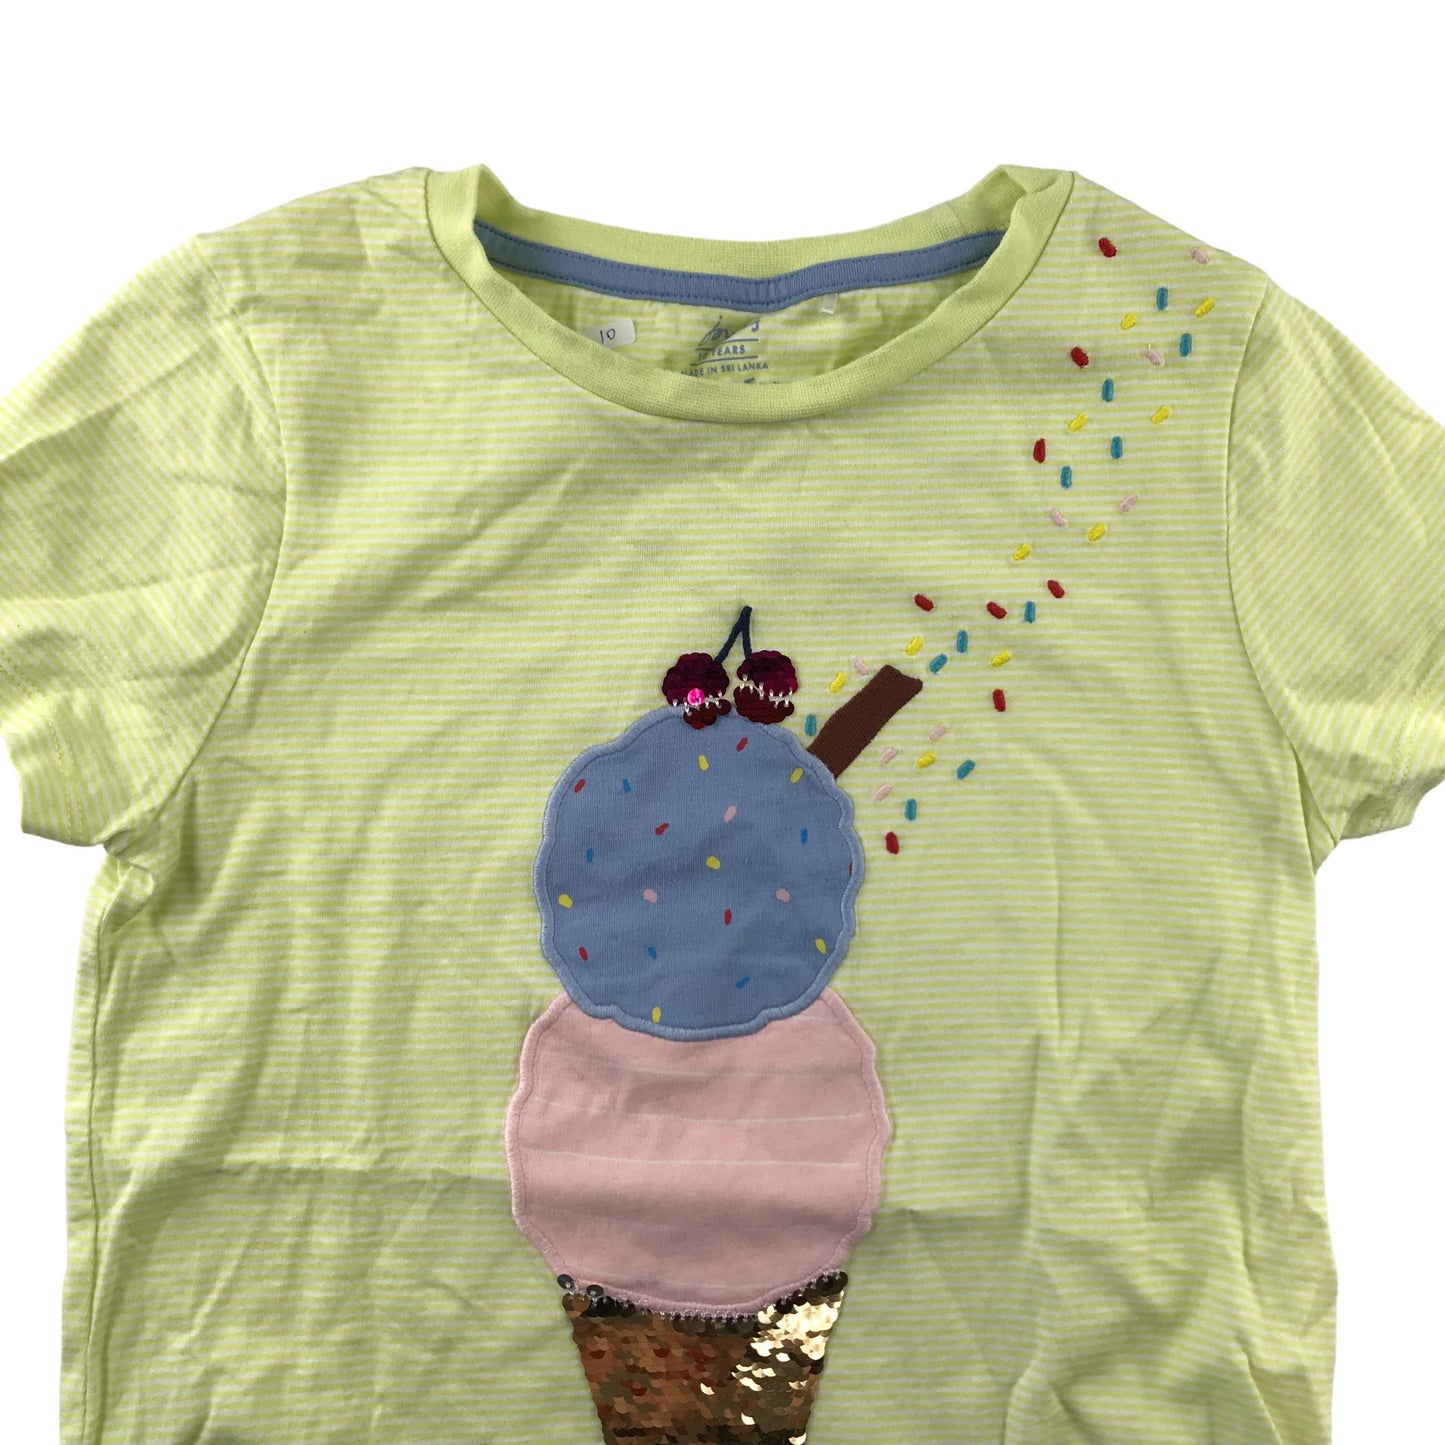 Joules T-Shirt Age 10 Yellow Sequin Ice Cream Design Cotton